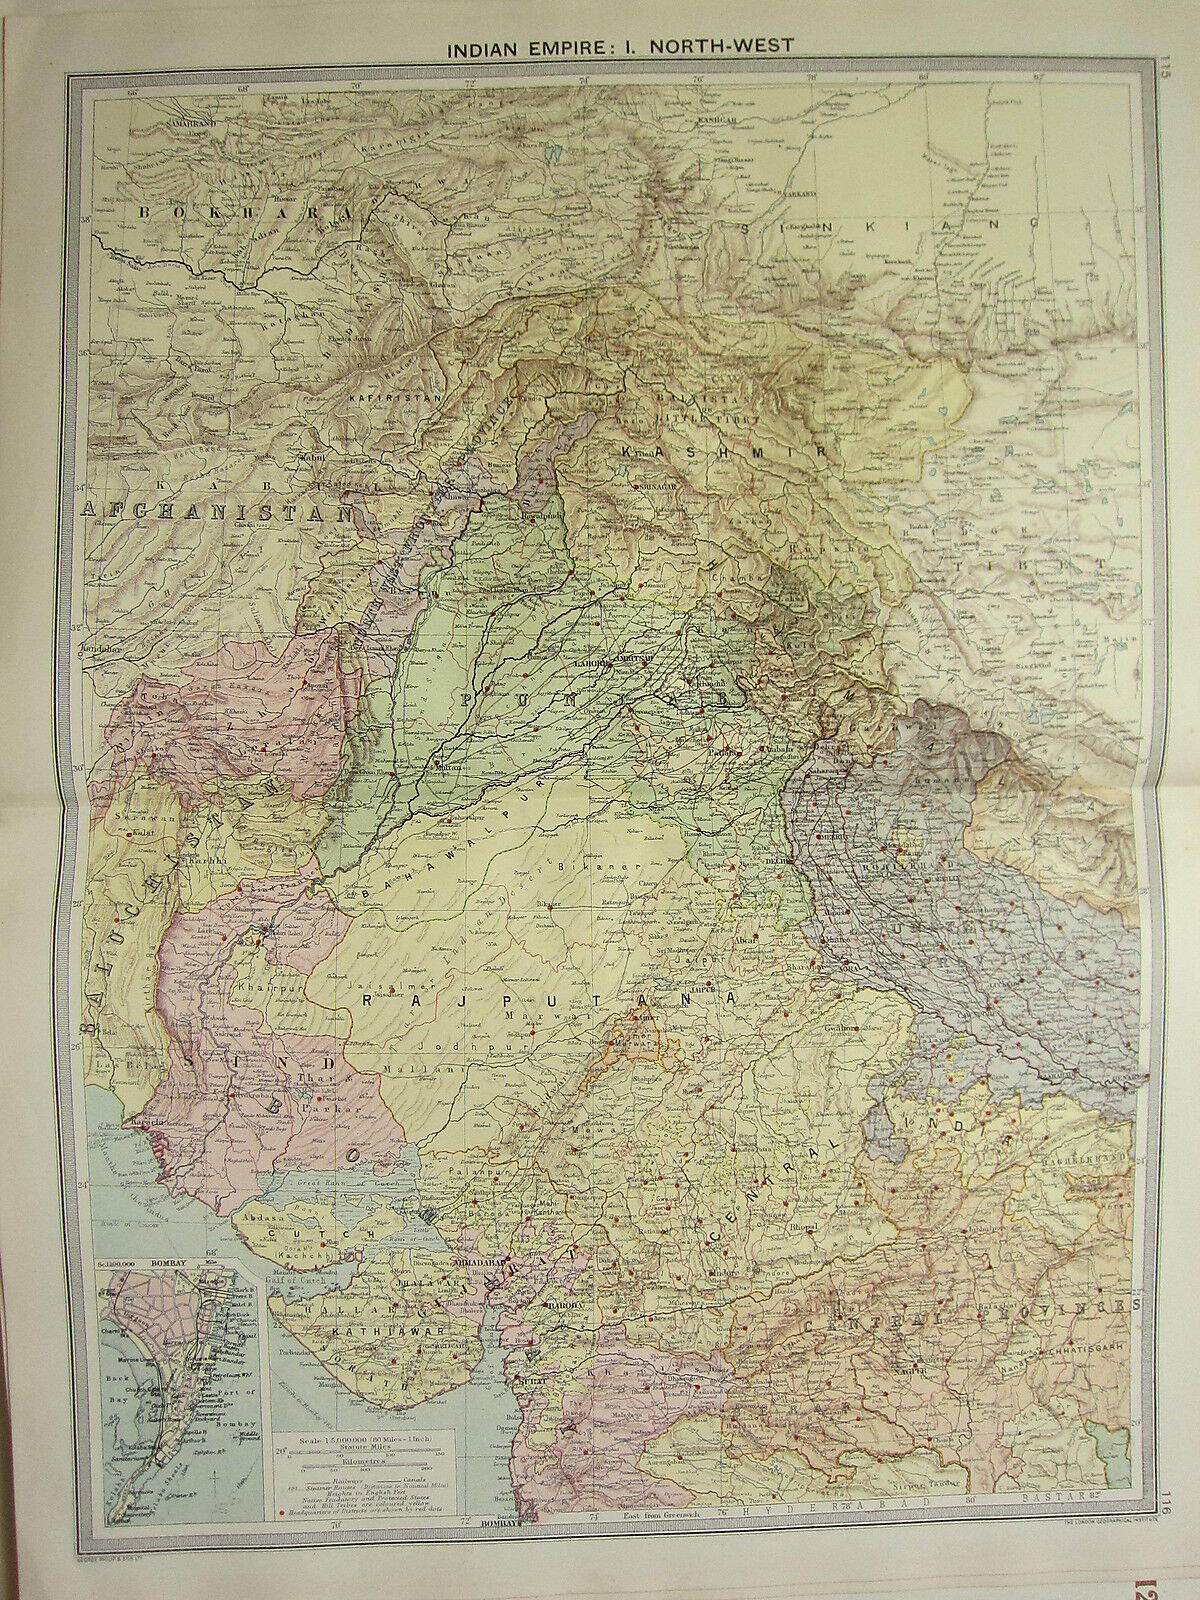 1920 LARGE MAP ~ INDIAN EMPIRE NORTH-WEST AFGHANISTAN BOMBAY PUNJAB HEADQUARTERS